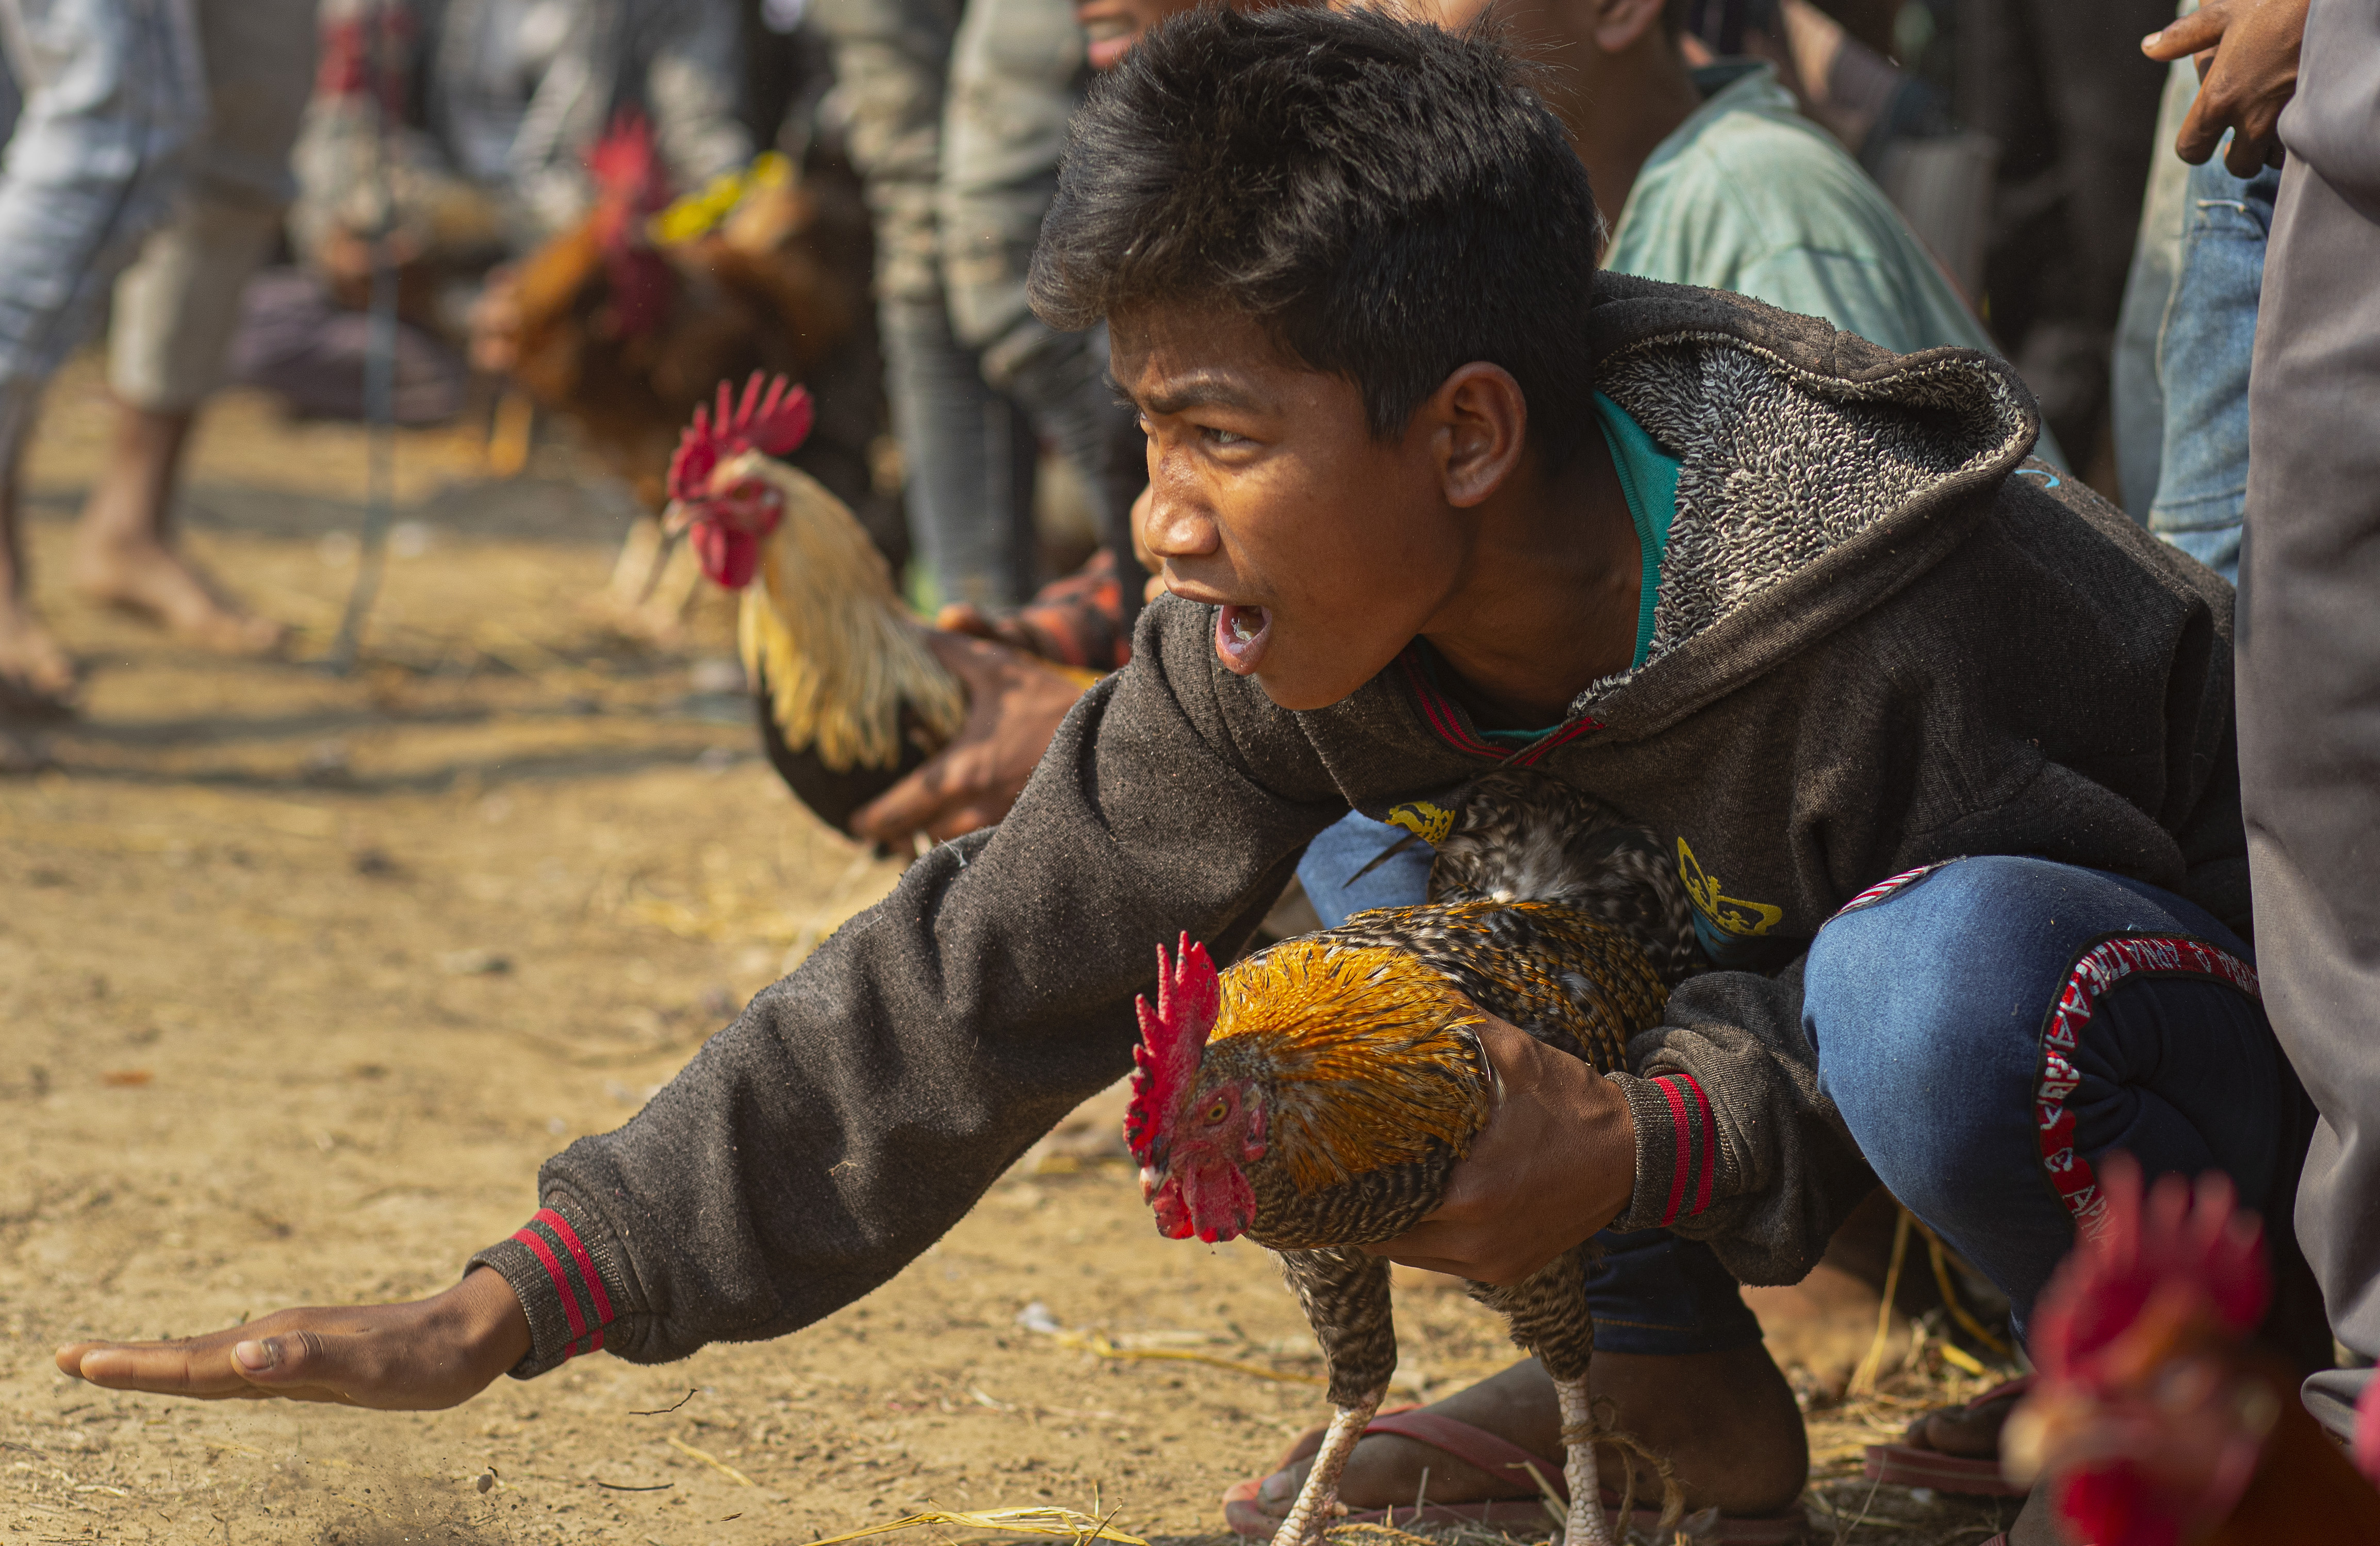 A boy shouts to encourage his rooster during a cockfight as part of Jonbeel festival near Jagiroad, about 75 kilometers (47 miles) east of Gauhati, India, Friday, Jan. 17, 2020. Tribal communities like Tiwa, Karbi, Khasi, and Jaintia from nearby hills participate in large numbers in this festival, that signifies harmony and brotherhood amongst various tribes and communities, and exchange goods through an established barter system. (AP Photo/Anupam Nath)